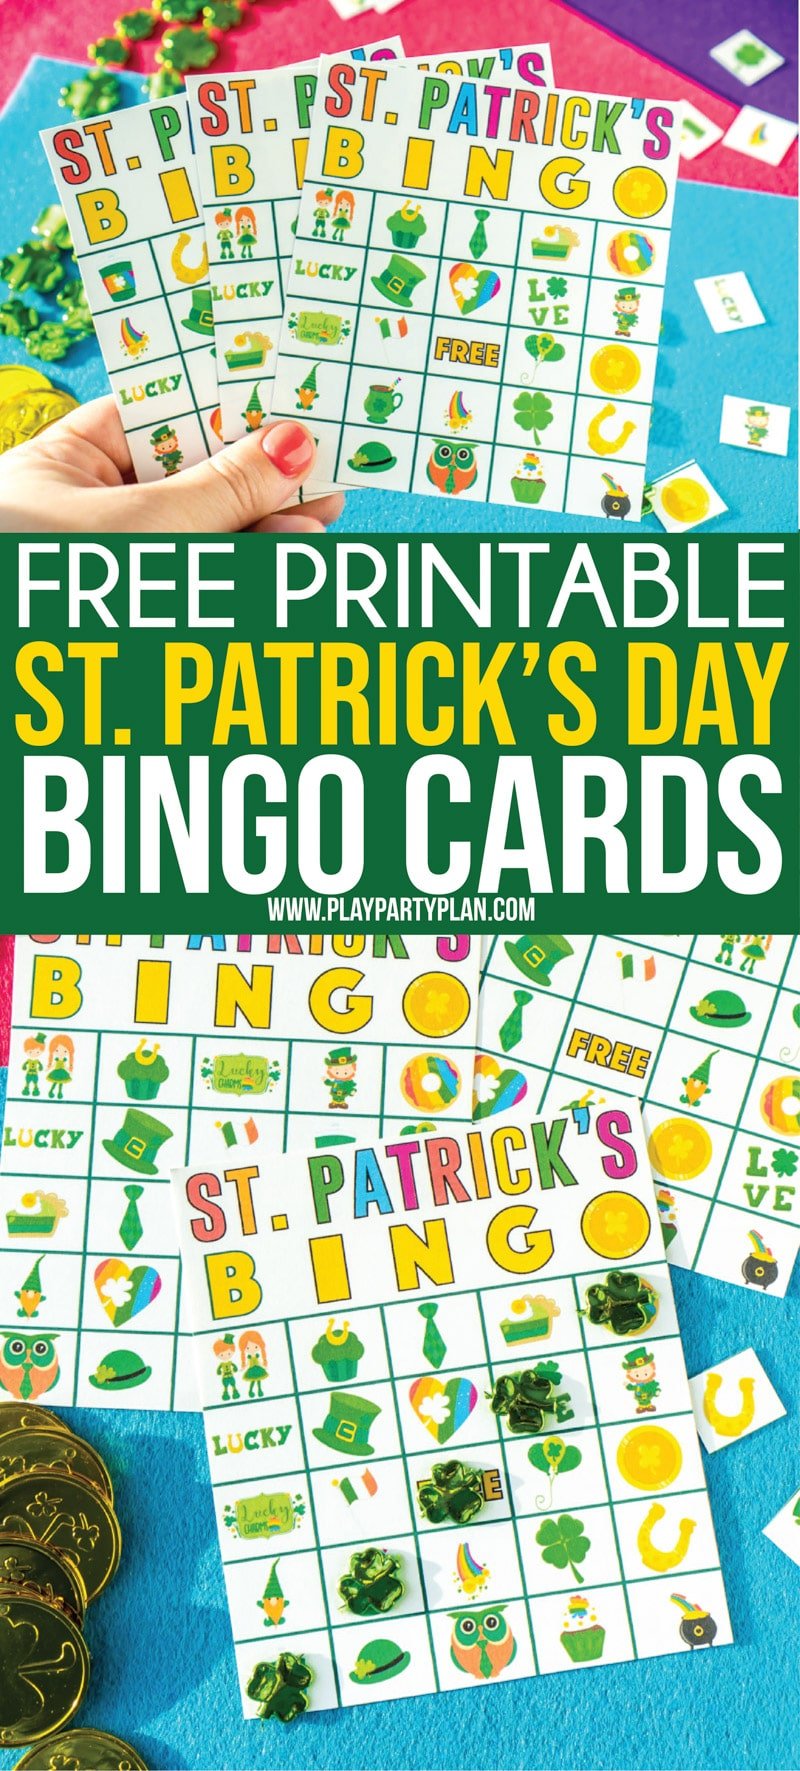 Printable St. Patrick's Day bingo cards that are fun for kids or adults! One of the best party games or activities for players of all ages!